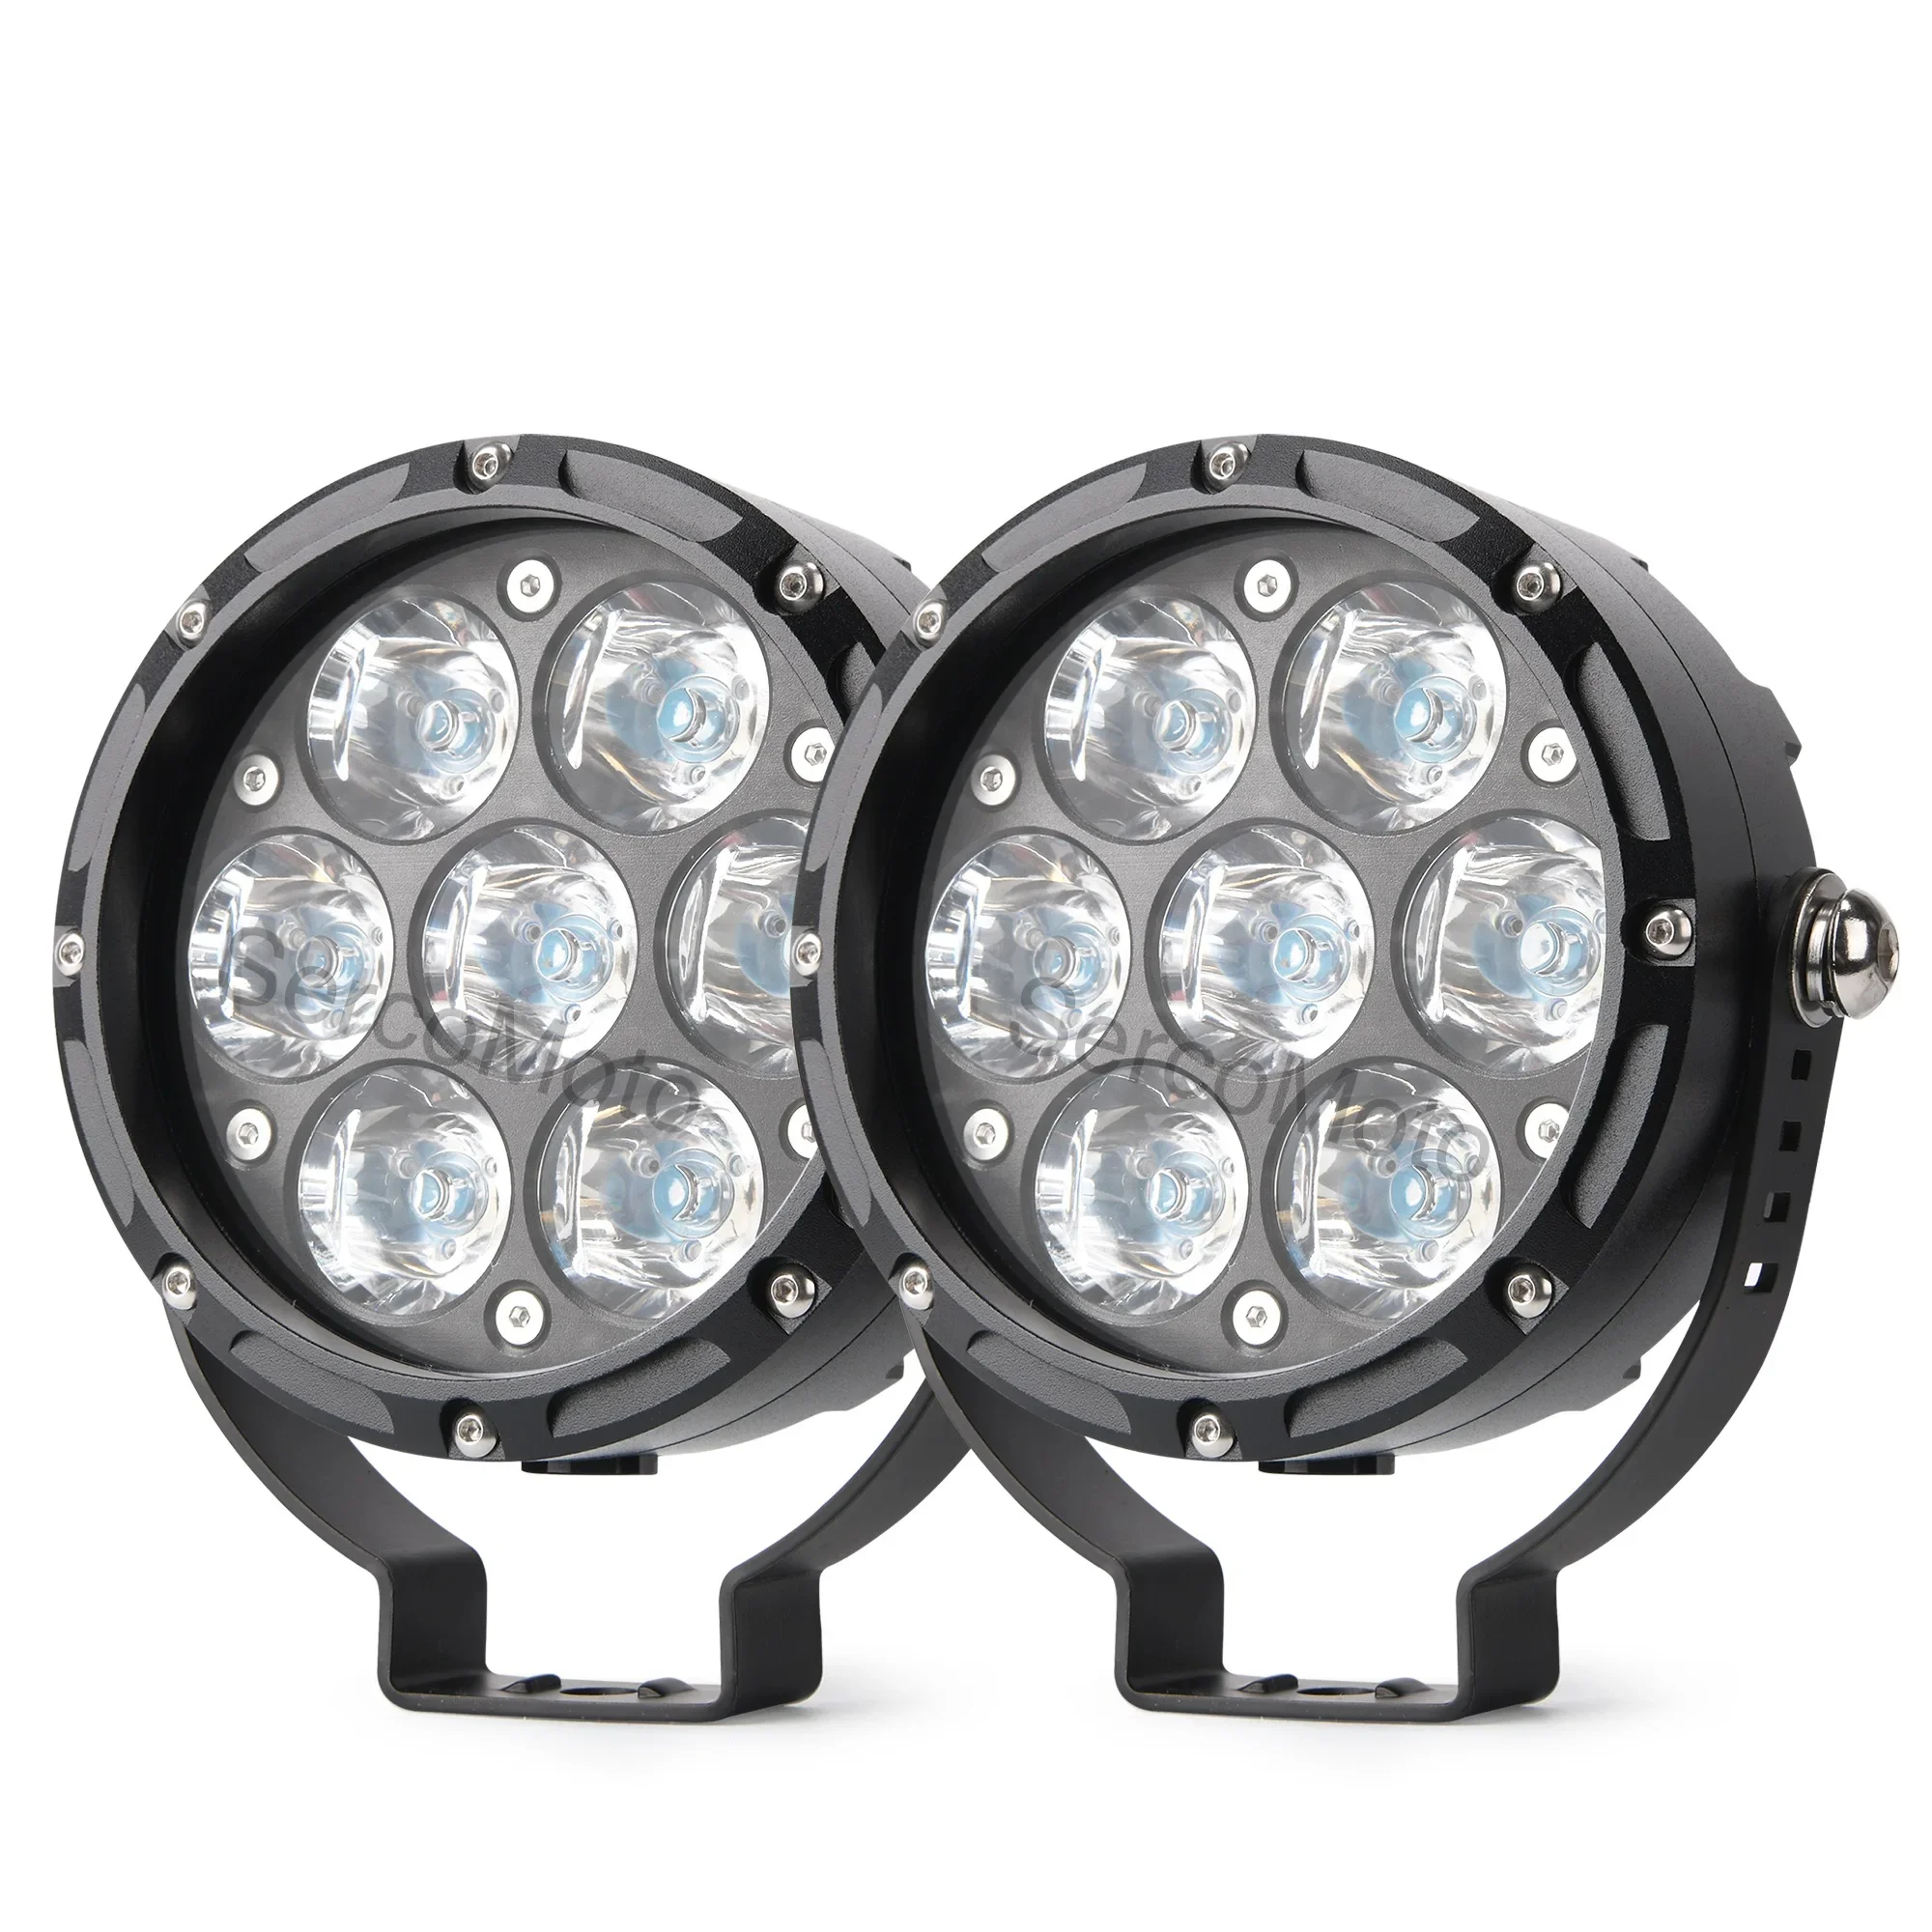 

SercomotoNew arrival of 2022 Off road led work lights 70w for 4x4 accessories 70w led work light